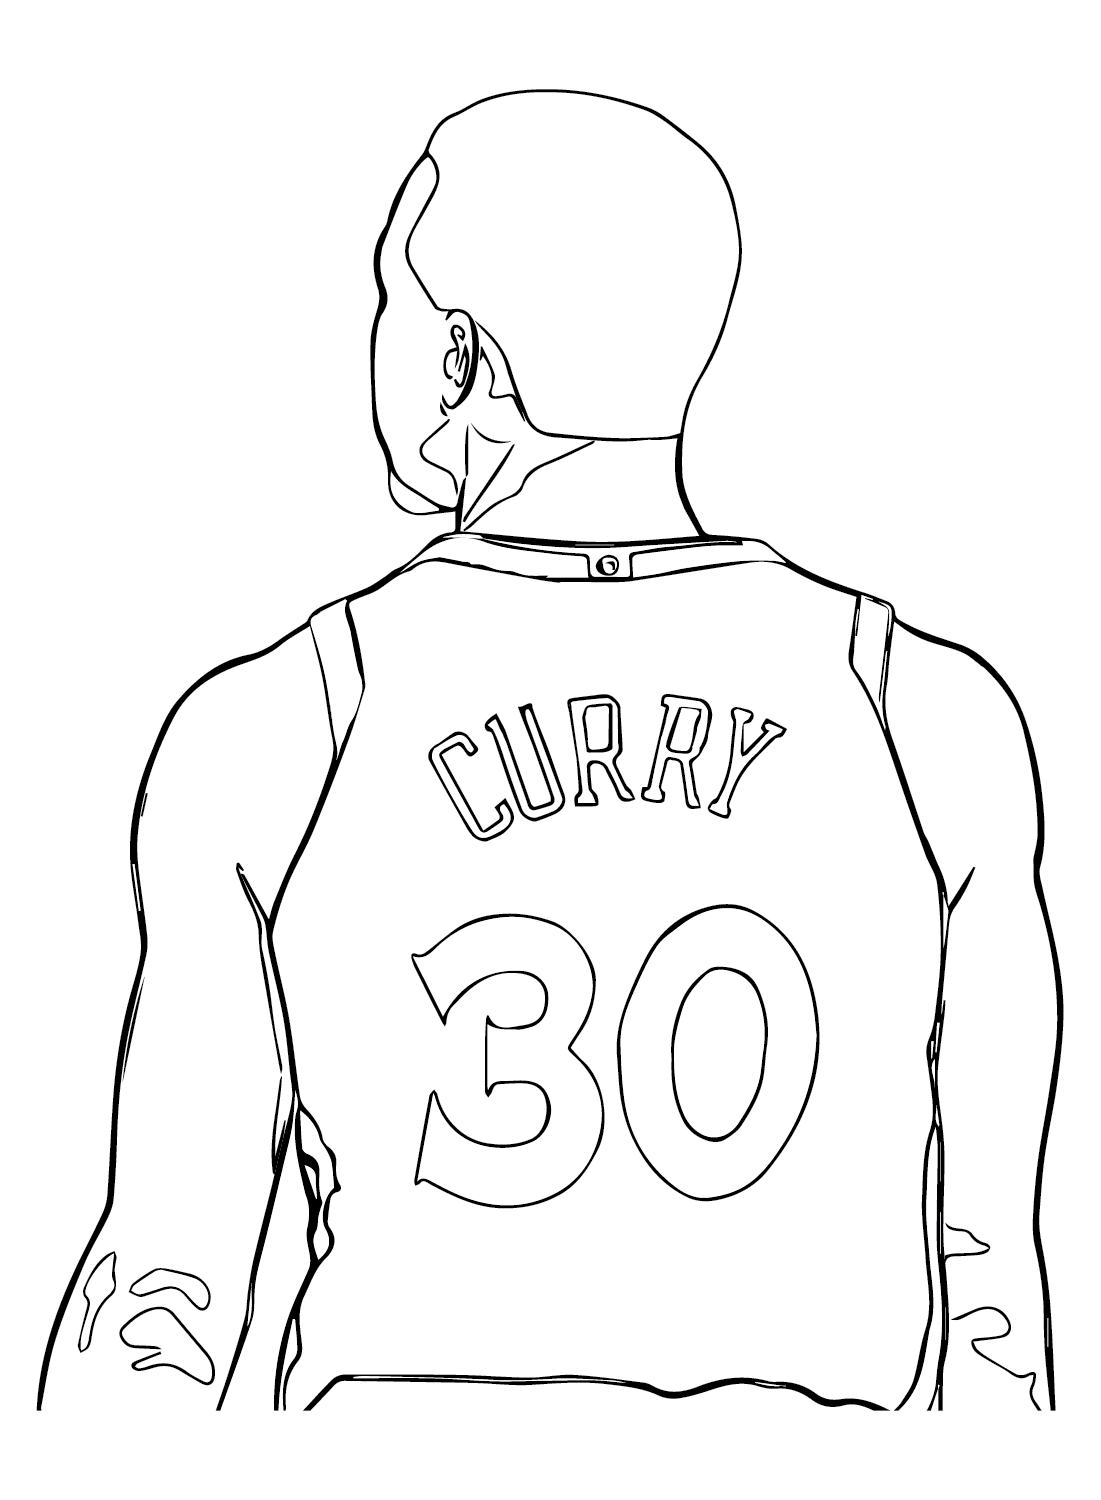 Stephen curry drawing coloring page